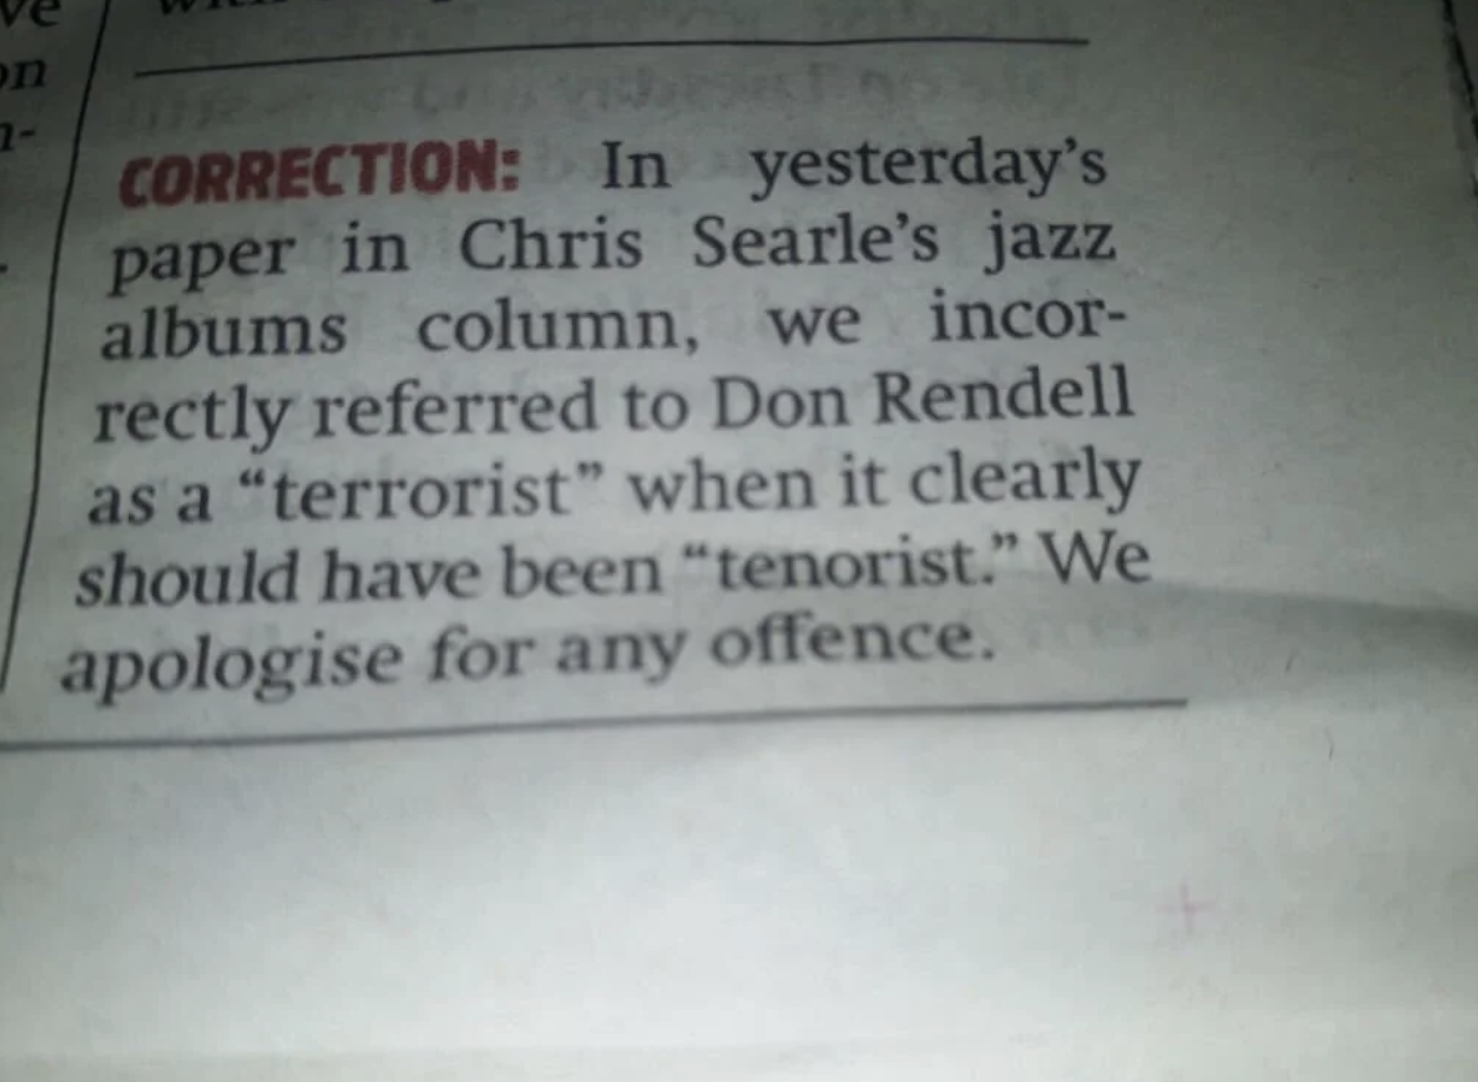 Newspaper correction clarifies a jazz artist named Don Rendell was mistakenly called a &quot;terrorist&quot; instead of &quot;tenorist.&quot; Apology included